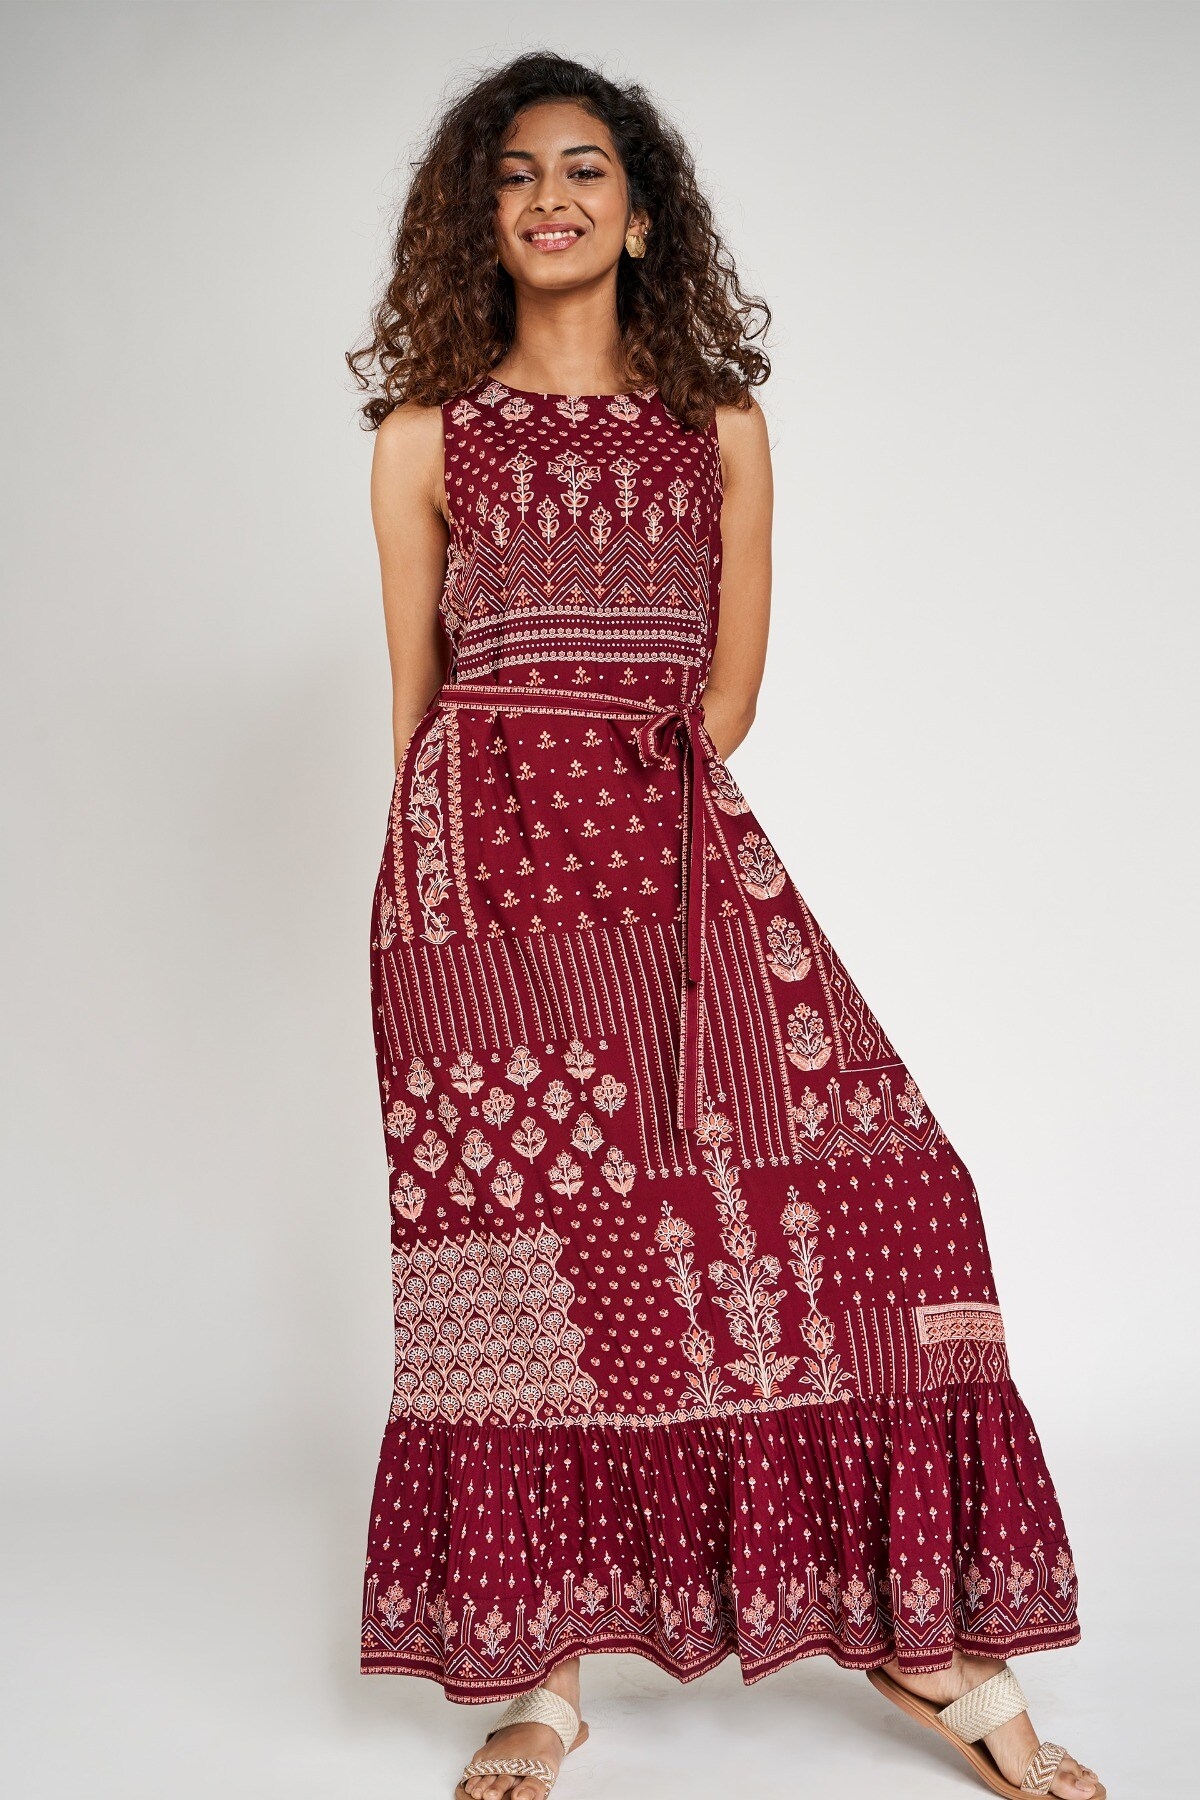 Global Desi | Maroon Floral Printed Fit And Flare Dress 5